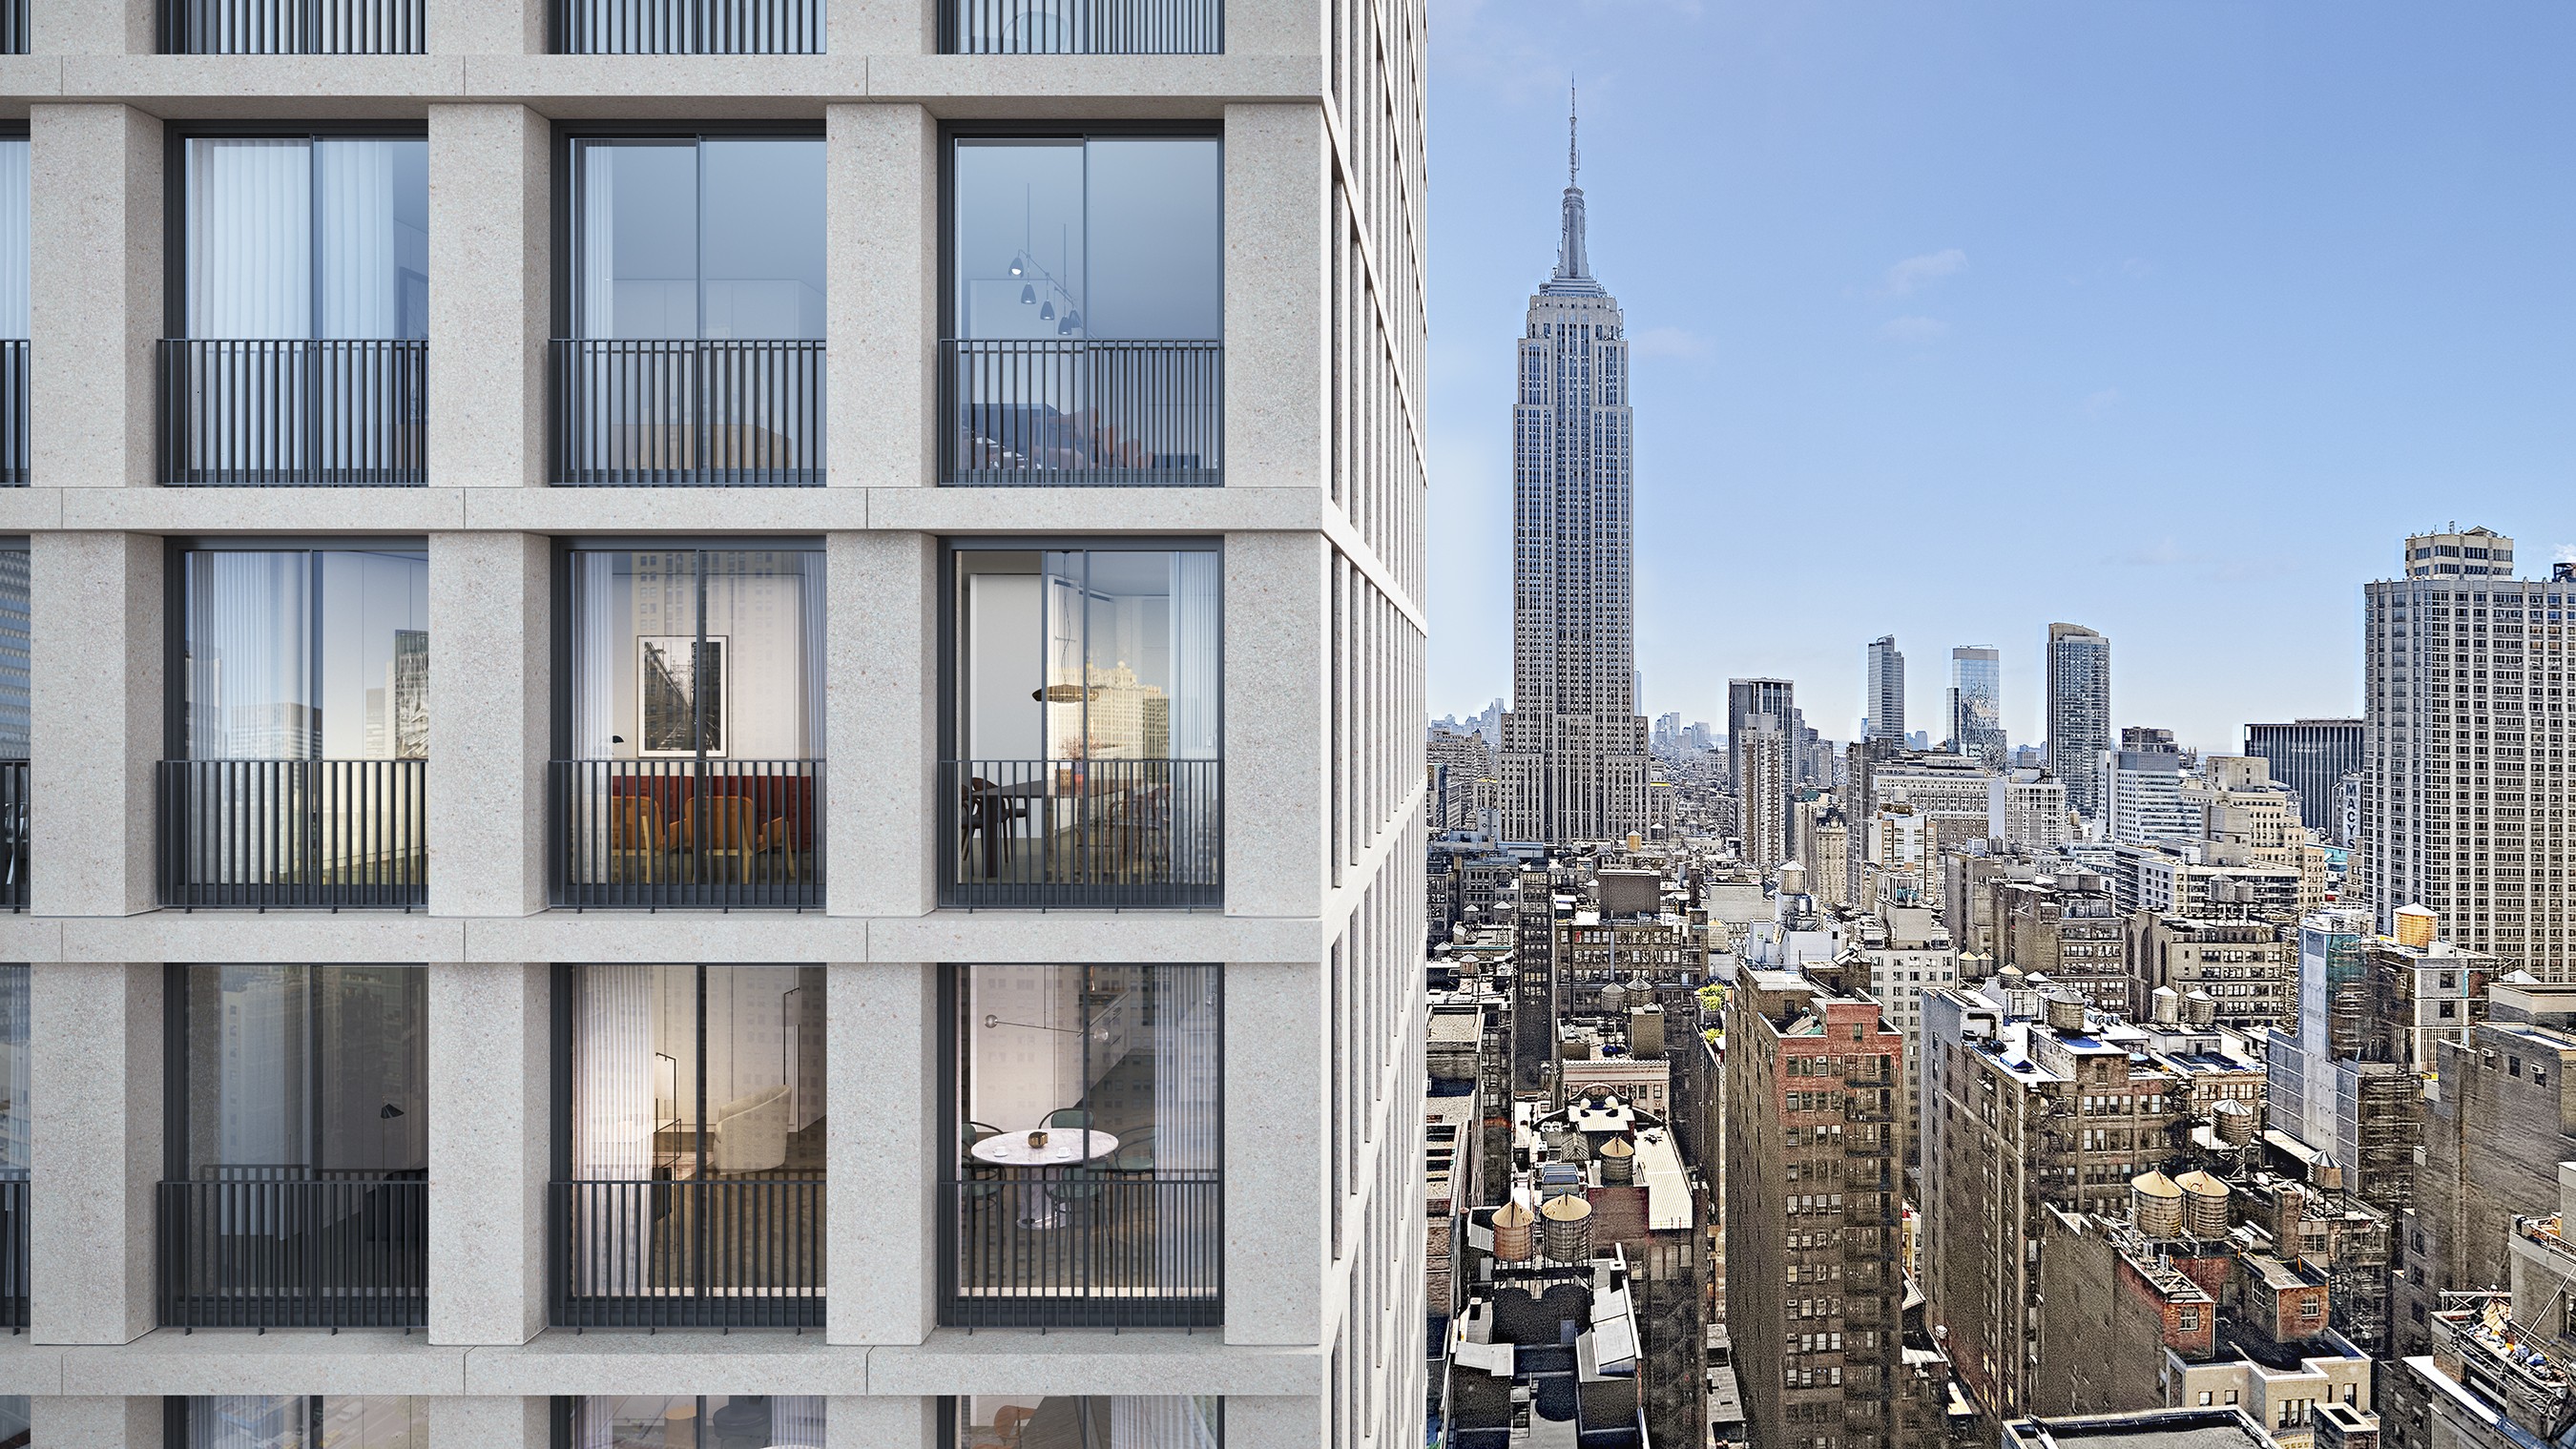 THE BRYANT by DAVID CHIPPERFIELD